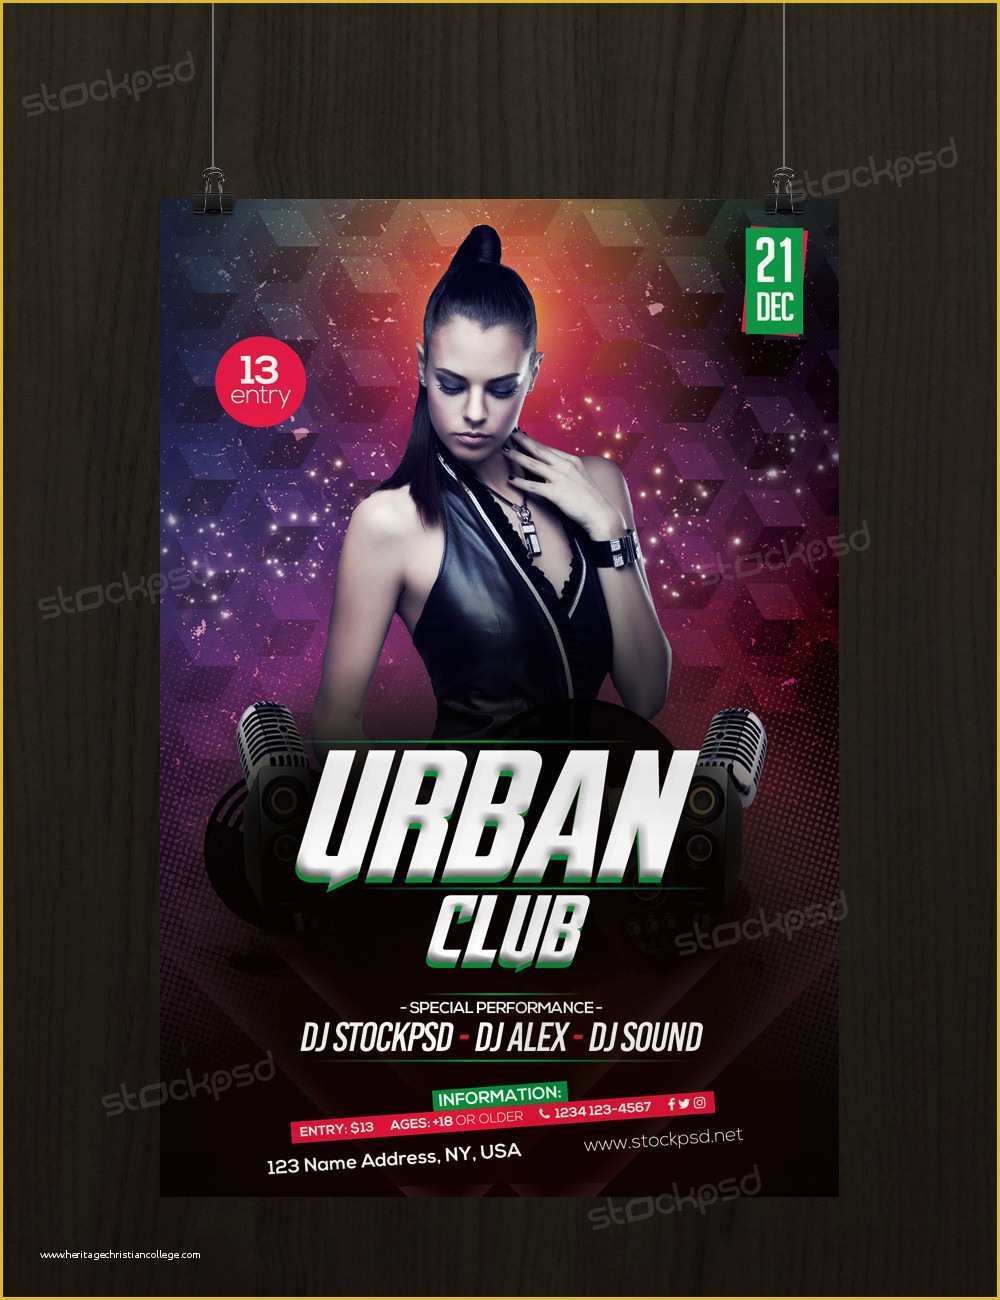 Free Club Flyer Templates Of Urban Club Download Free Psd Flyer Template Stockpsd